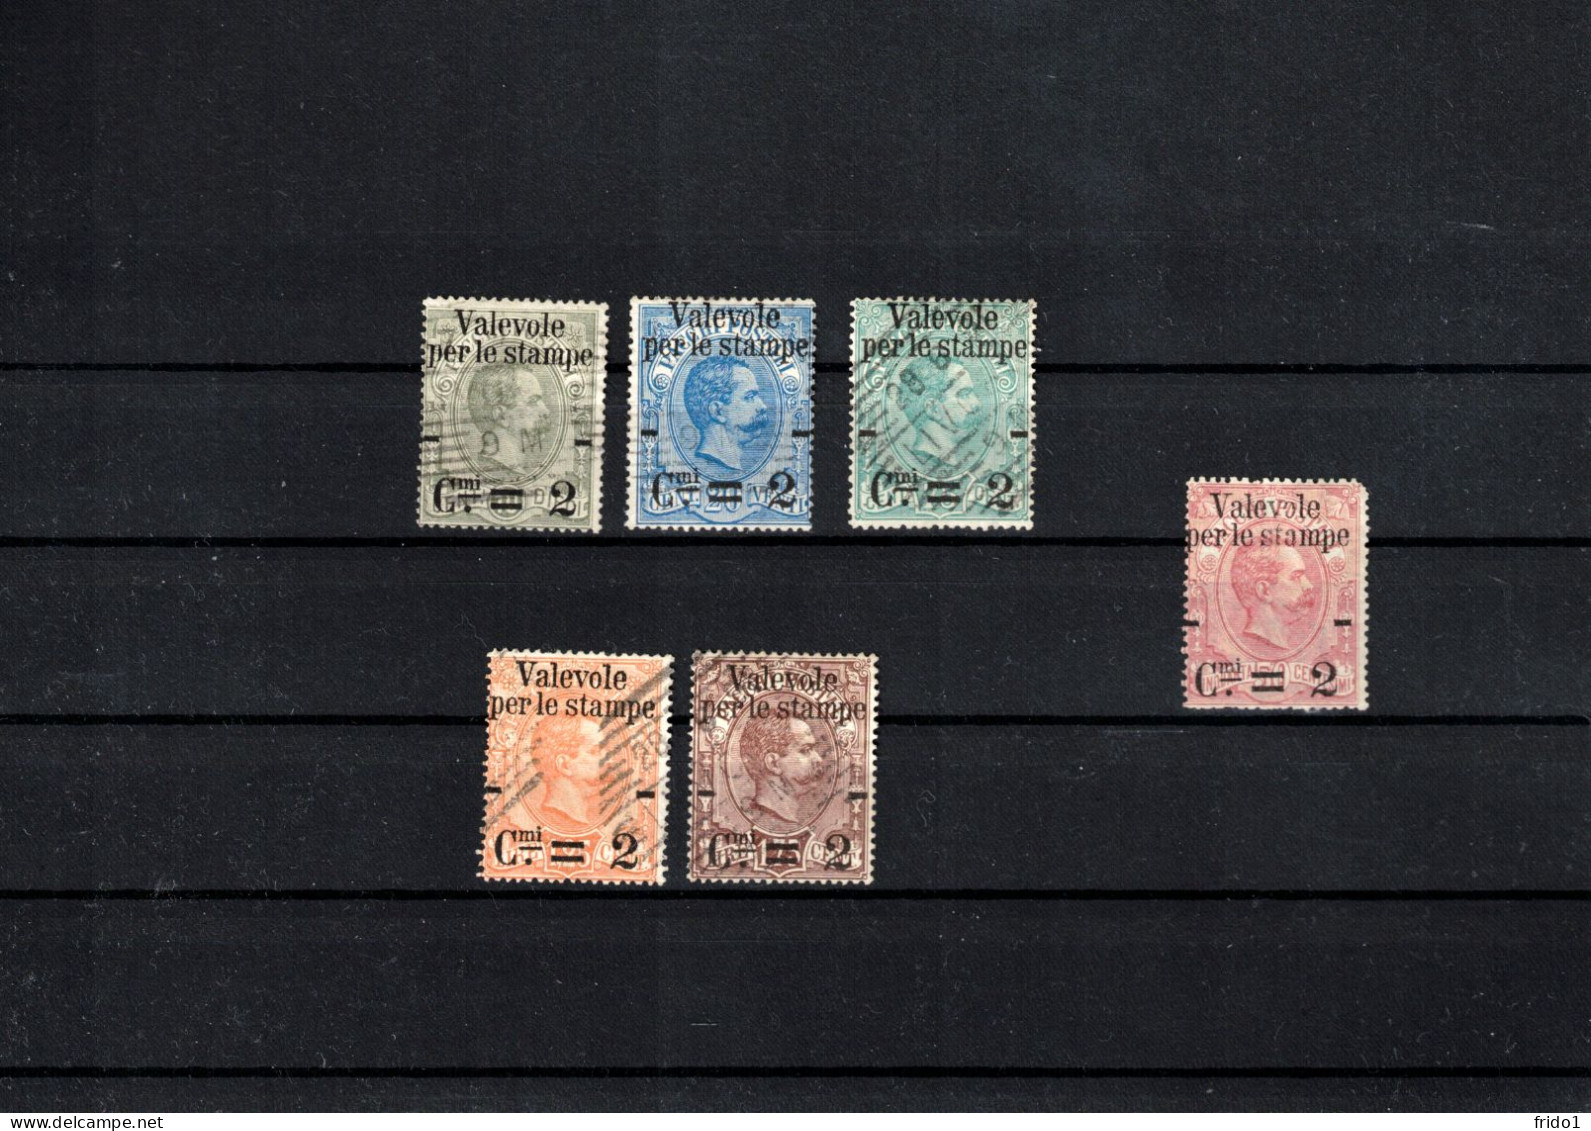 Italy / Italia 1890 Packet Stamps Overprinted For The Use As Press Stamps Fine Used - 50c Overprint Just As Sample - Usati